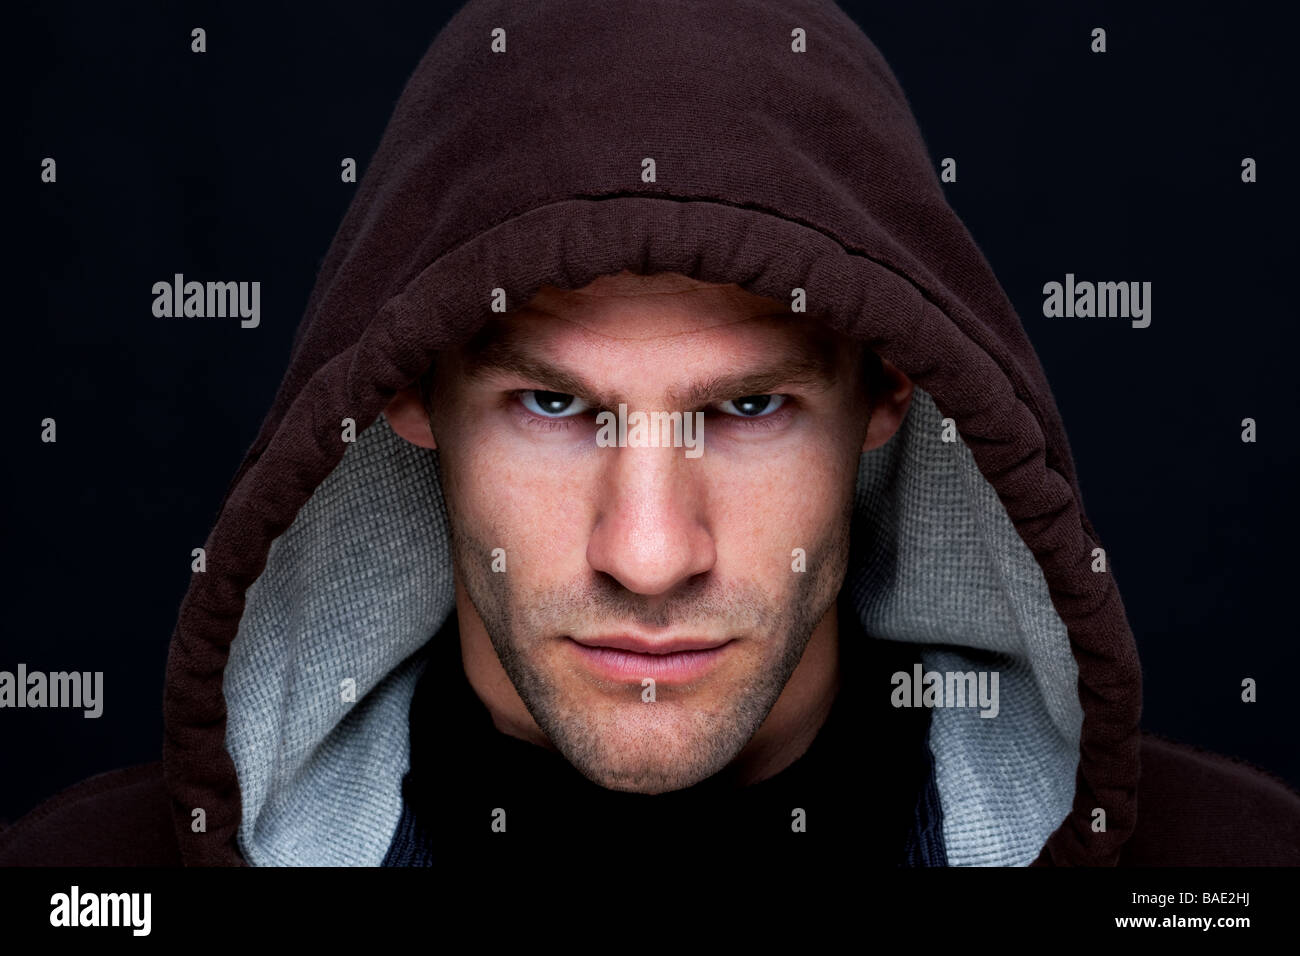 Headshot of a man wearing a brown hooded top with an intense stare Stock Photo